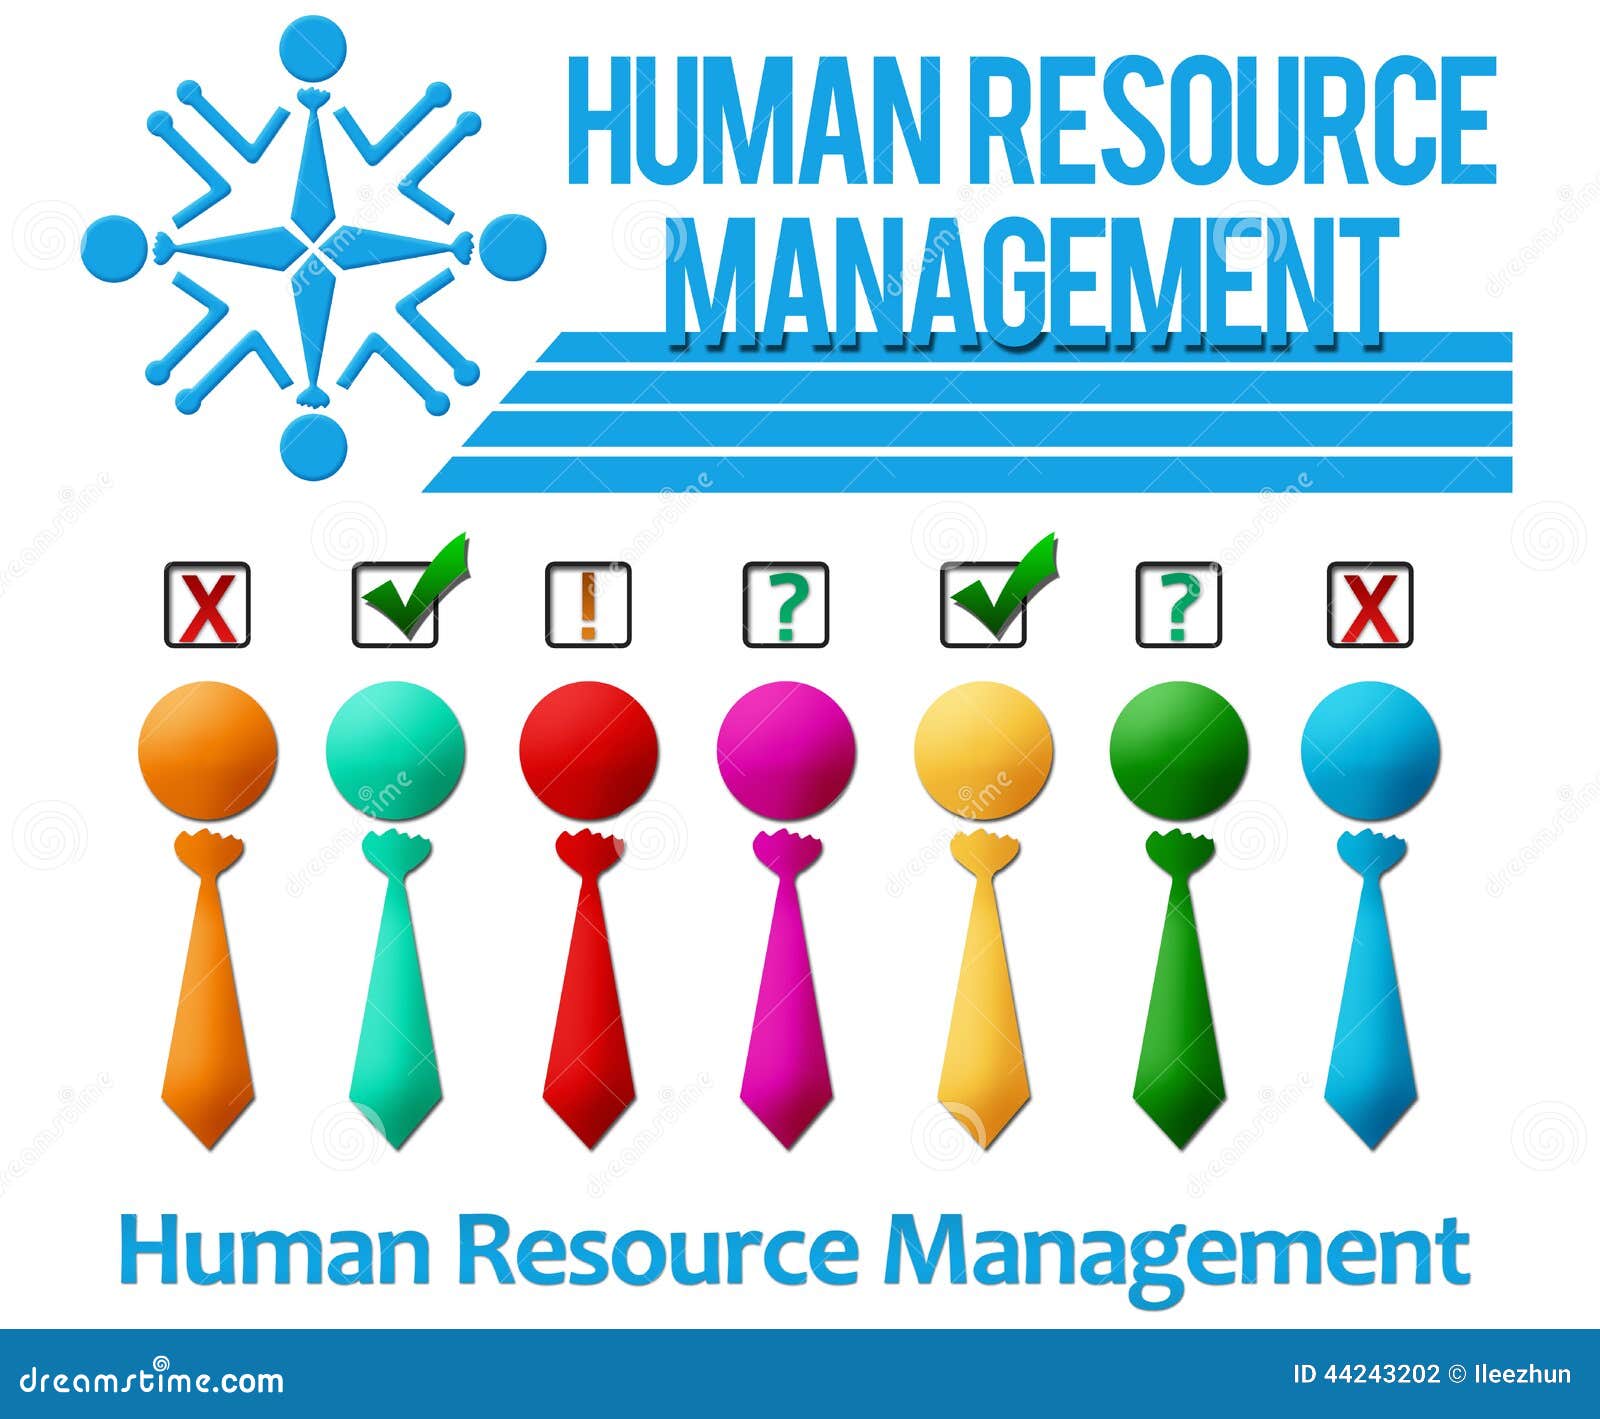 Why Major in Human Resource Management (HR)?